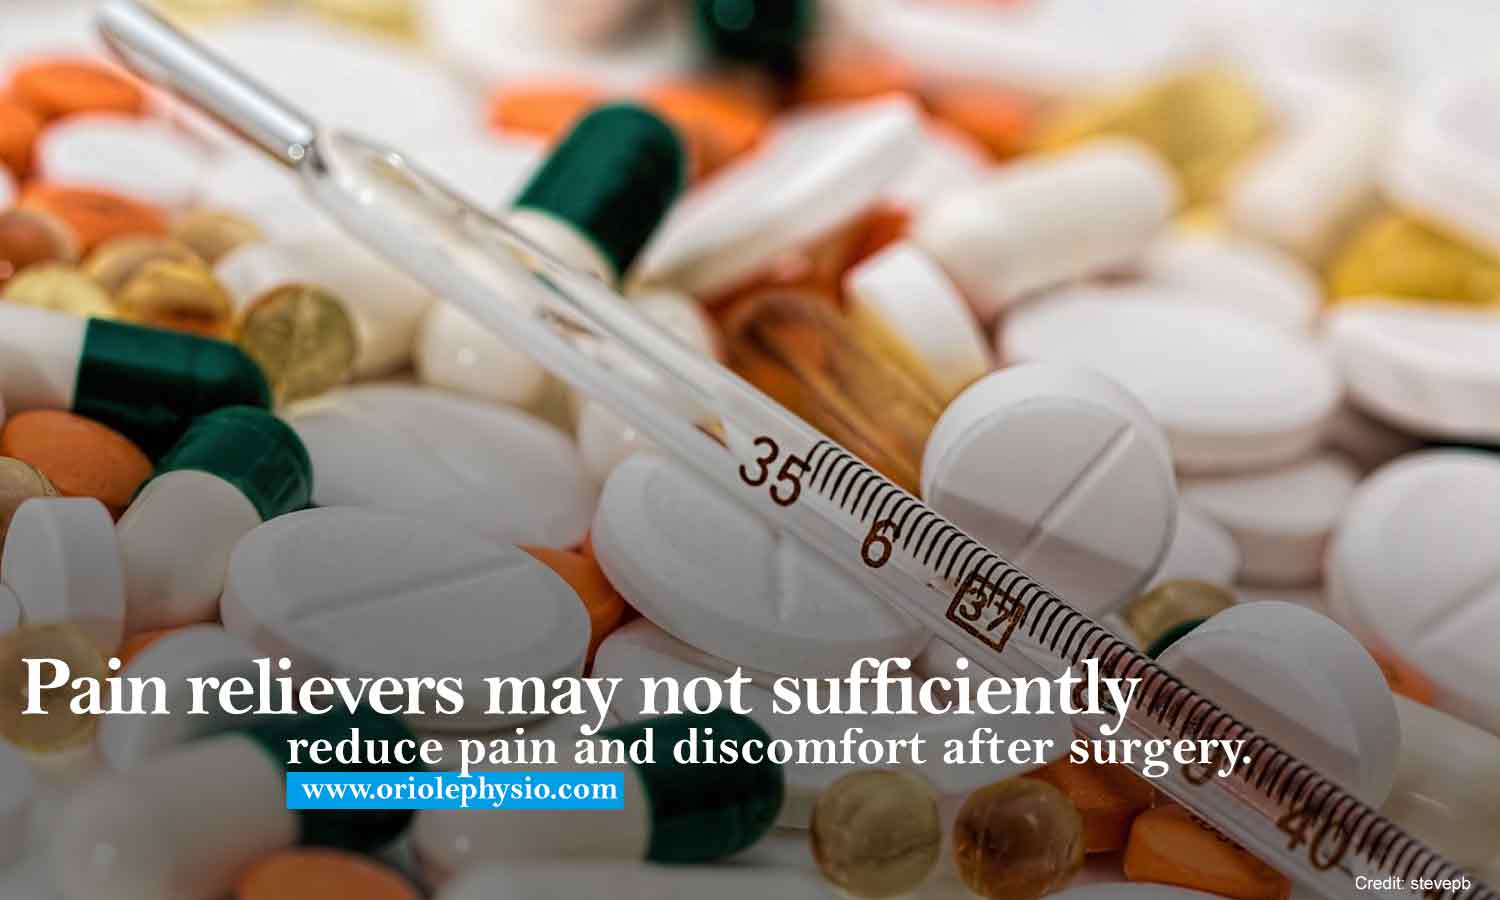 Pain relievers may not sufficiently reduce pain and discomfort after surgery.